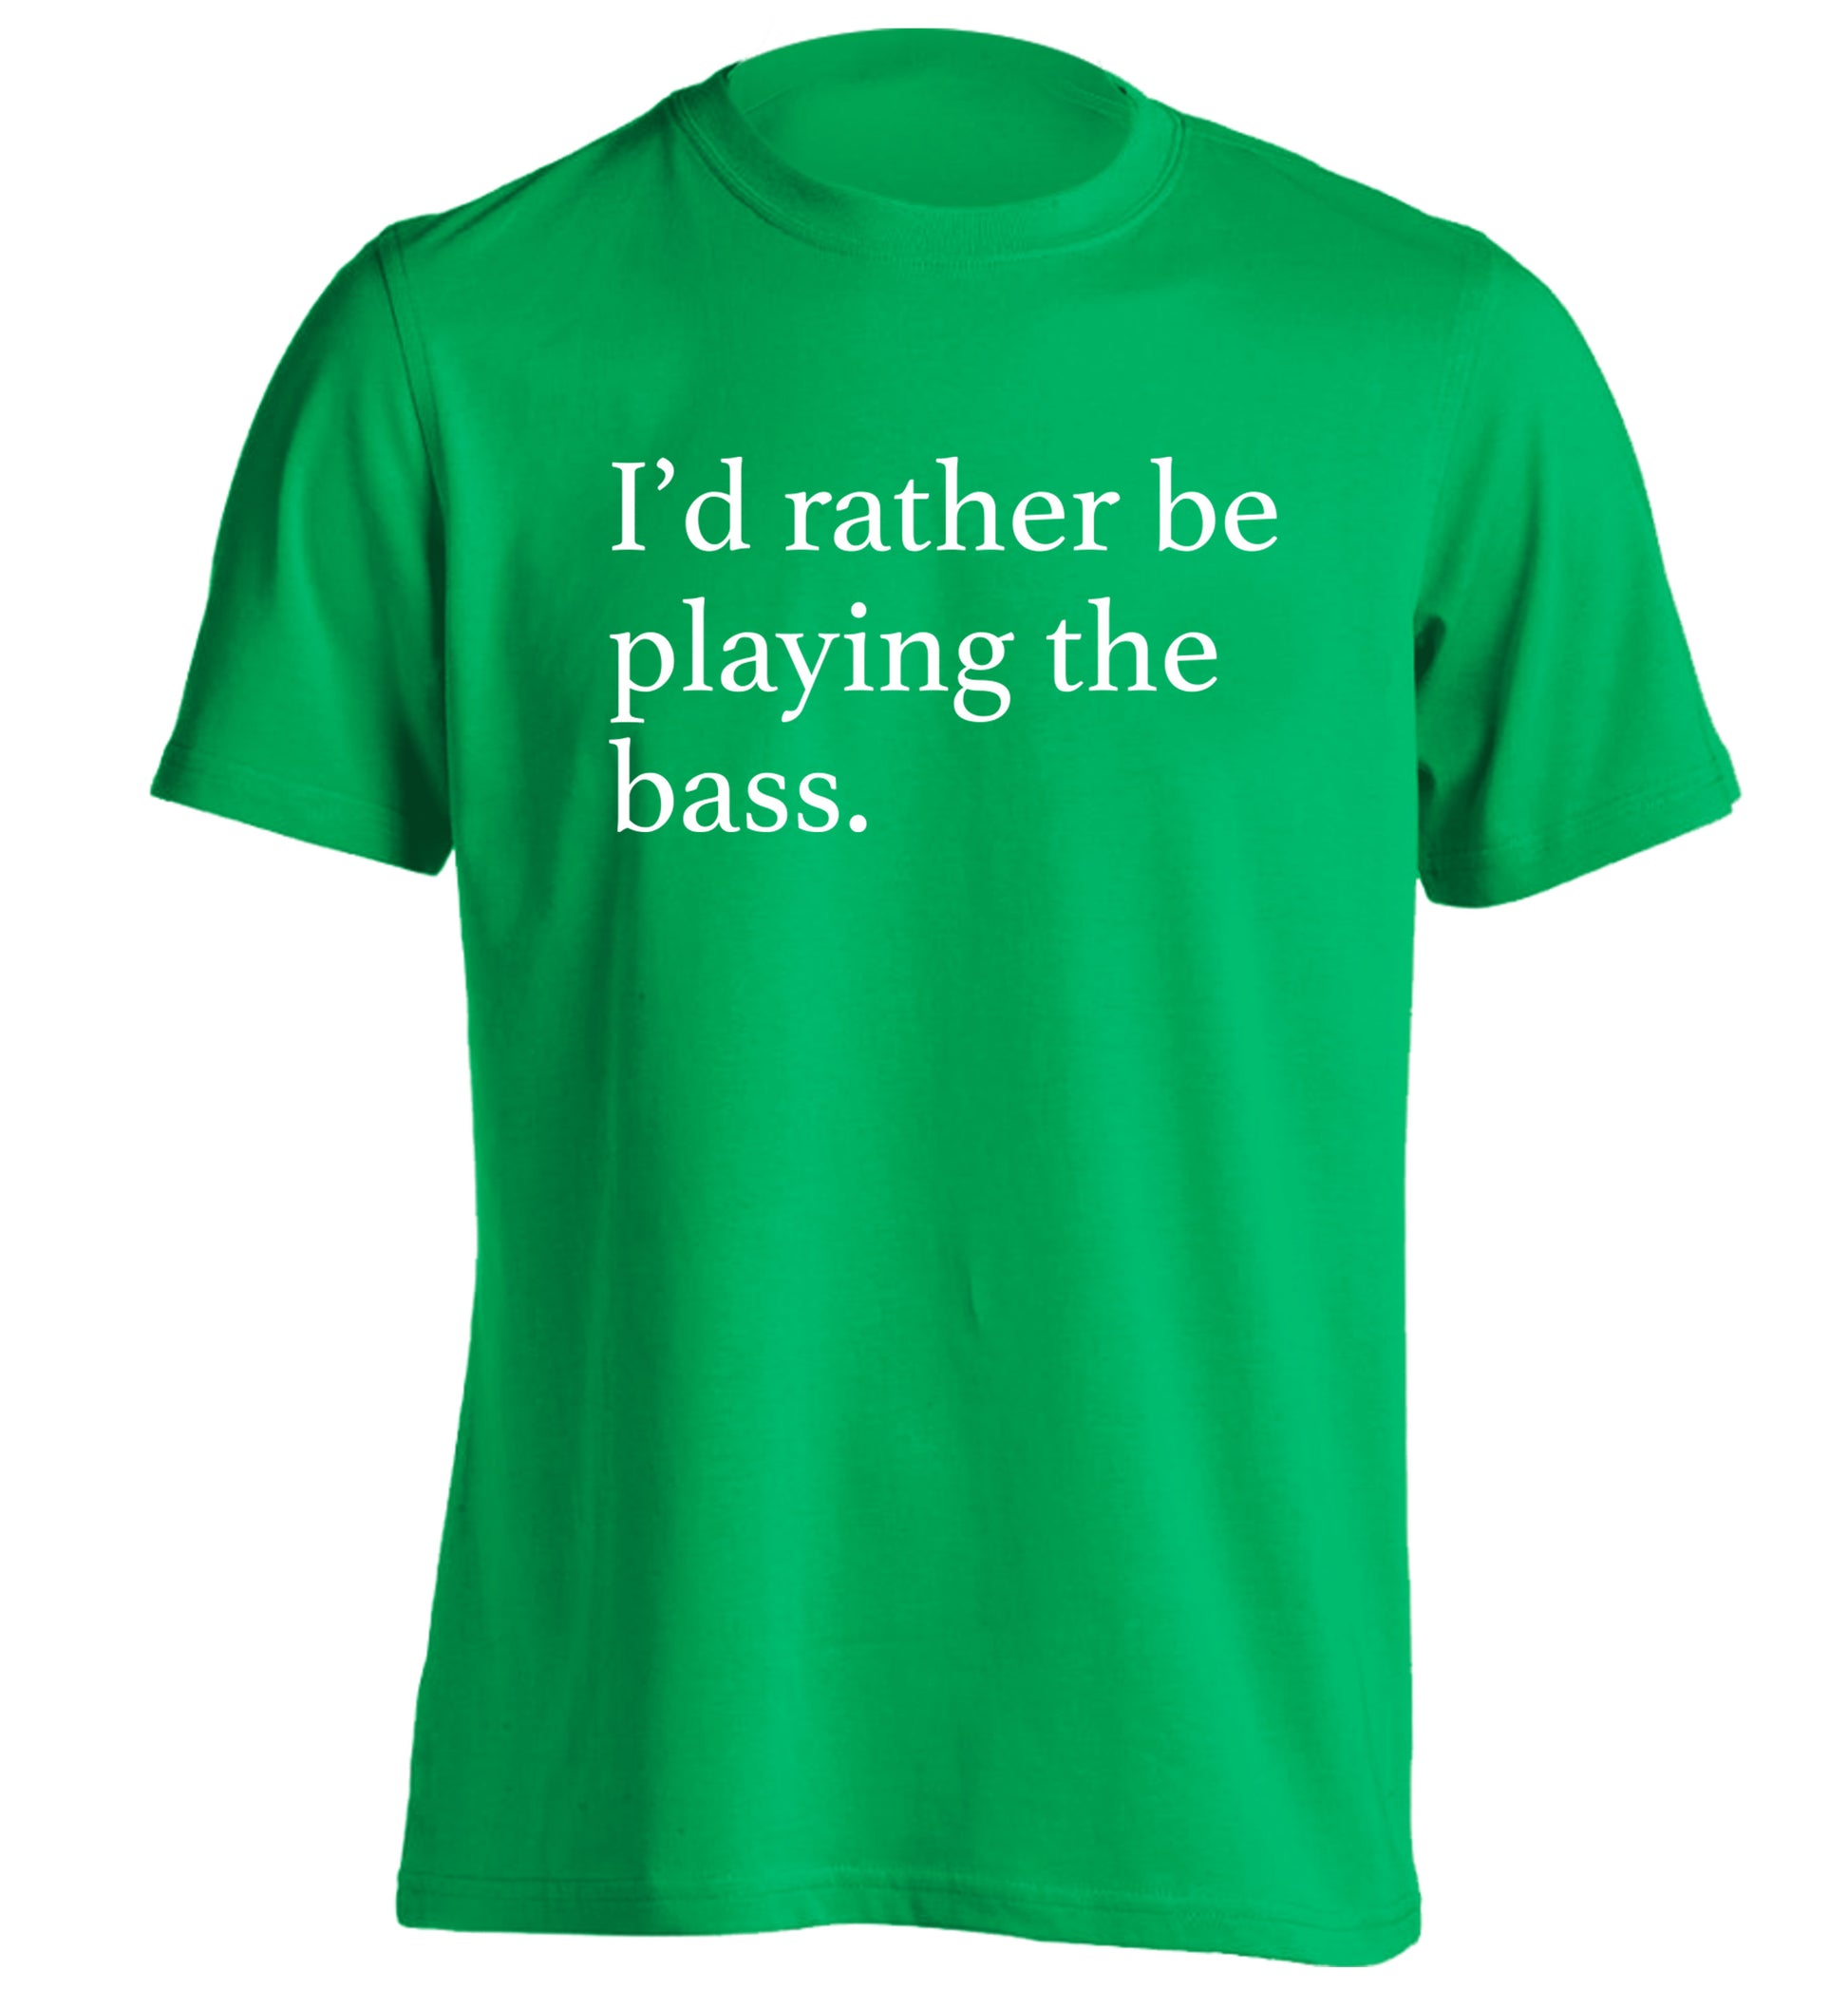 I'd rather by playing the bass adults unisex green Tshirt 2XL